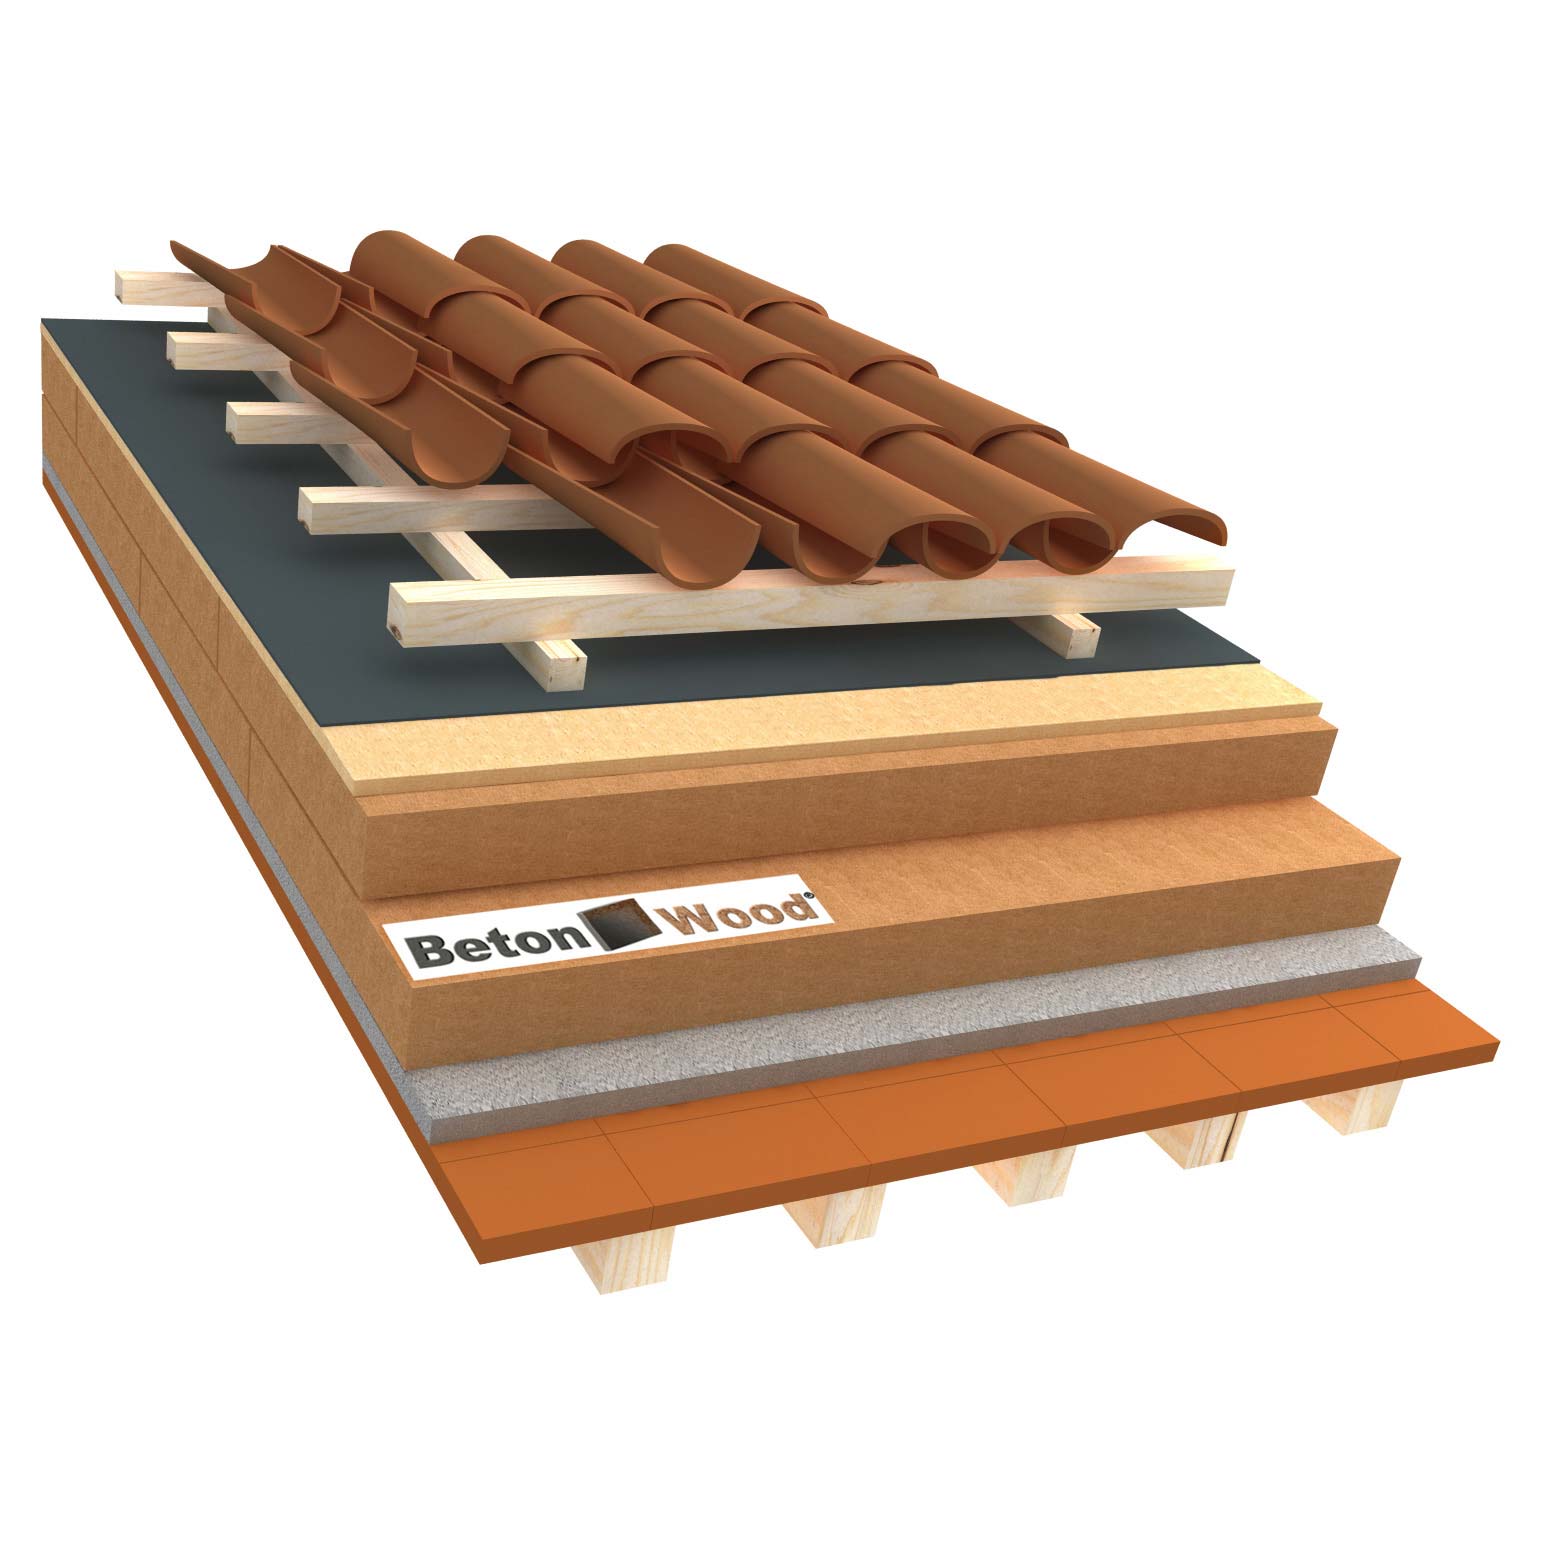 Ventilated roof with wood fiber Isorel and Universal dry on terracotta tiles